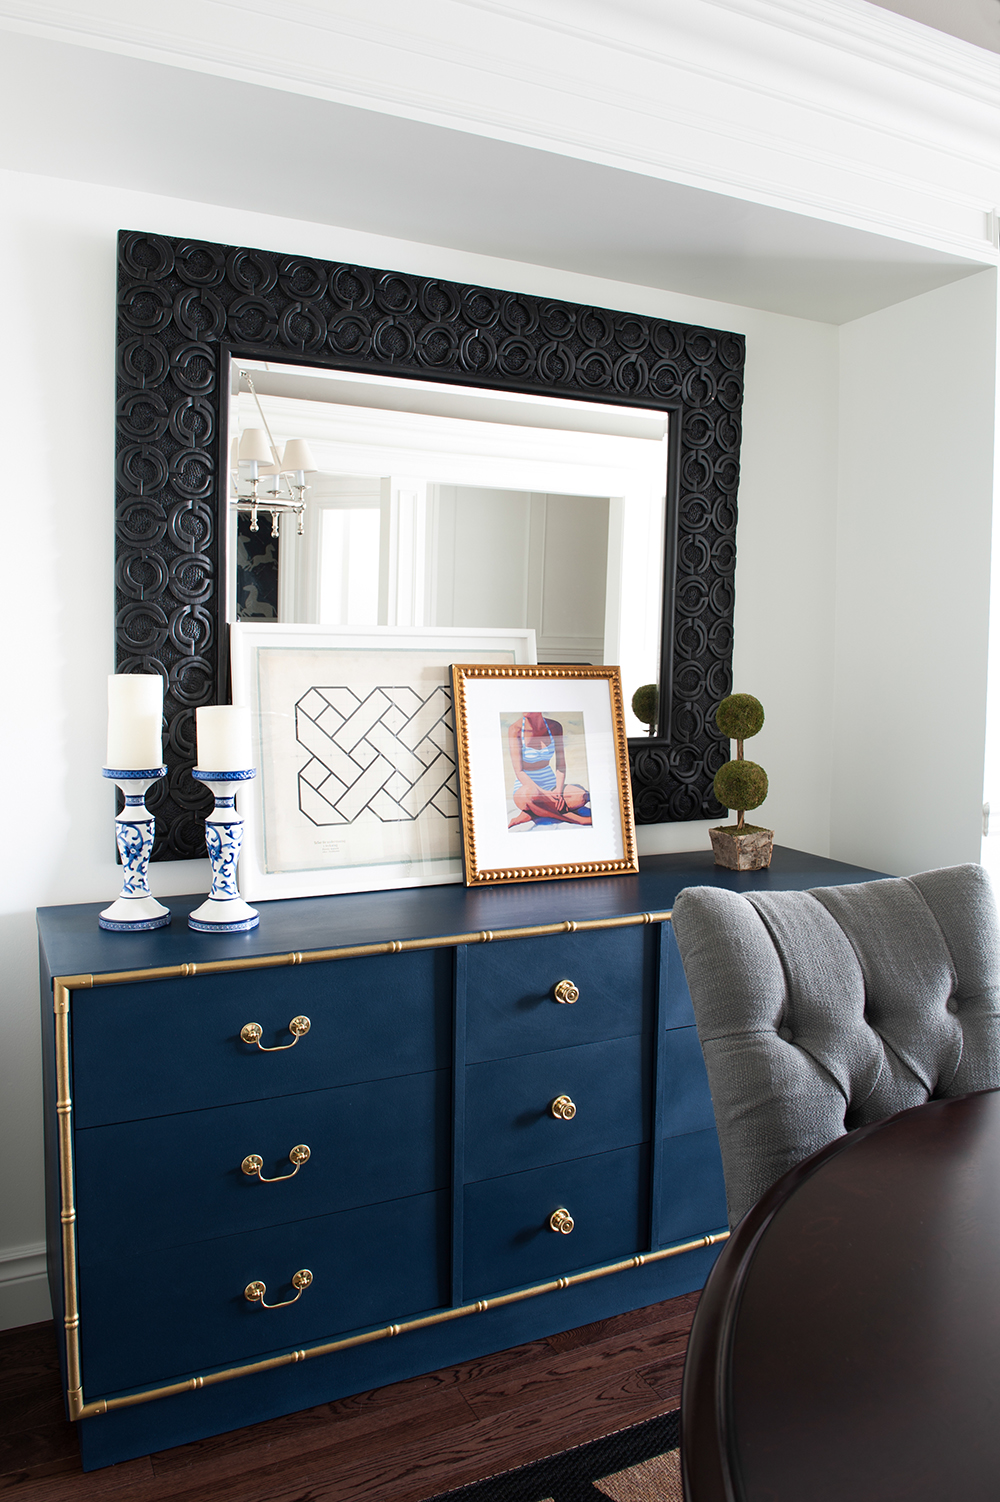 A dated dresser transforms into a showpiece with a fresh coat of paint.